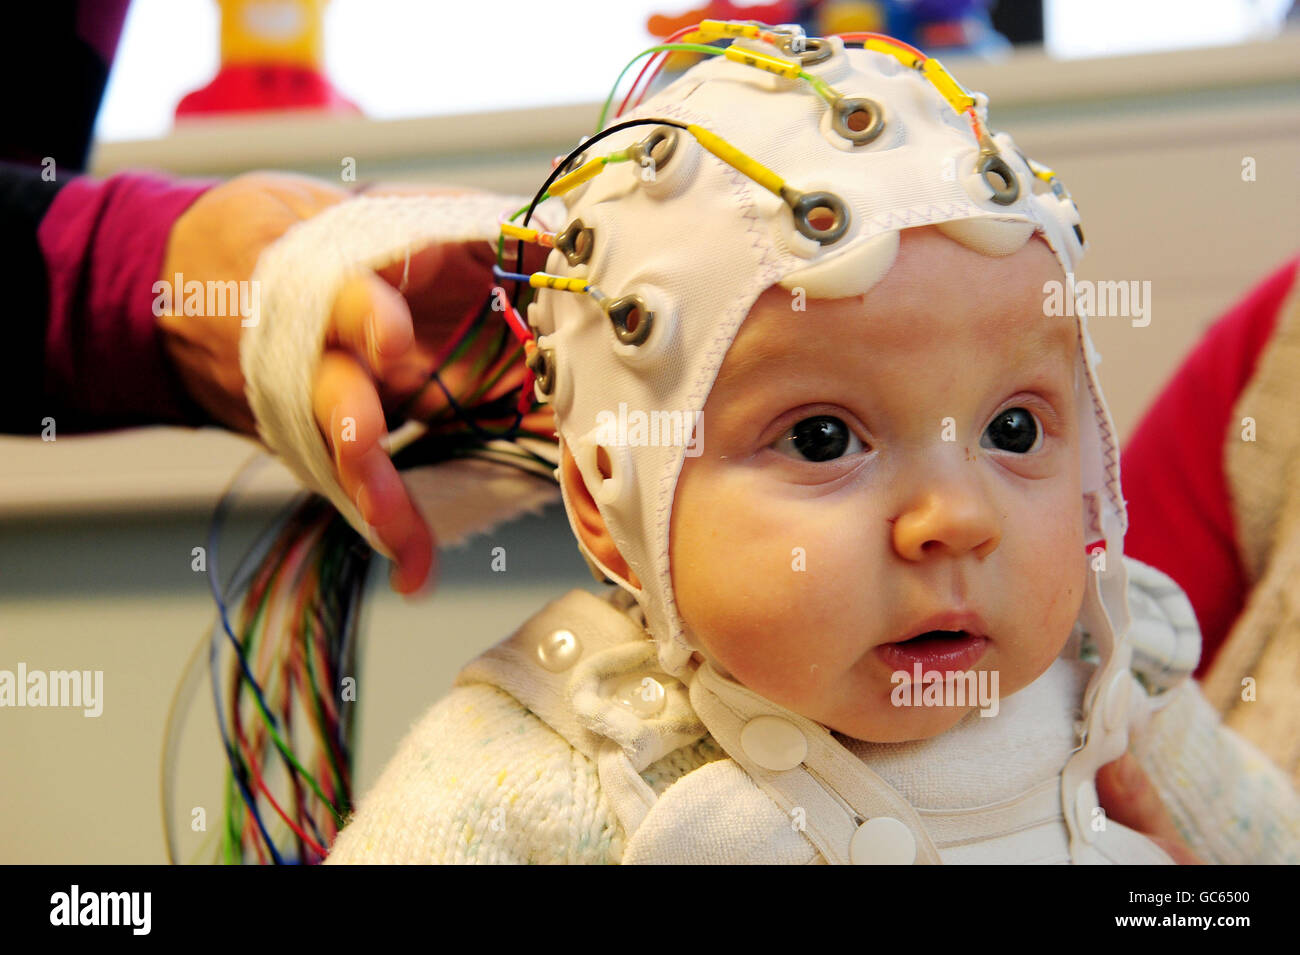 Four-month-old Matai Reid takes part in research by Durham University at the Stockton-on-Tees campus to study the development of babies brains. The research is trying to get a better understanding of how autism might occur. Stock Photo